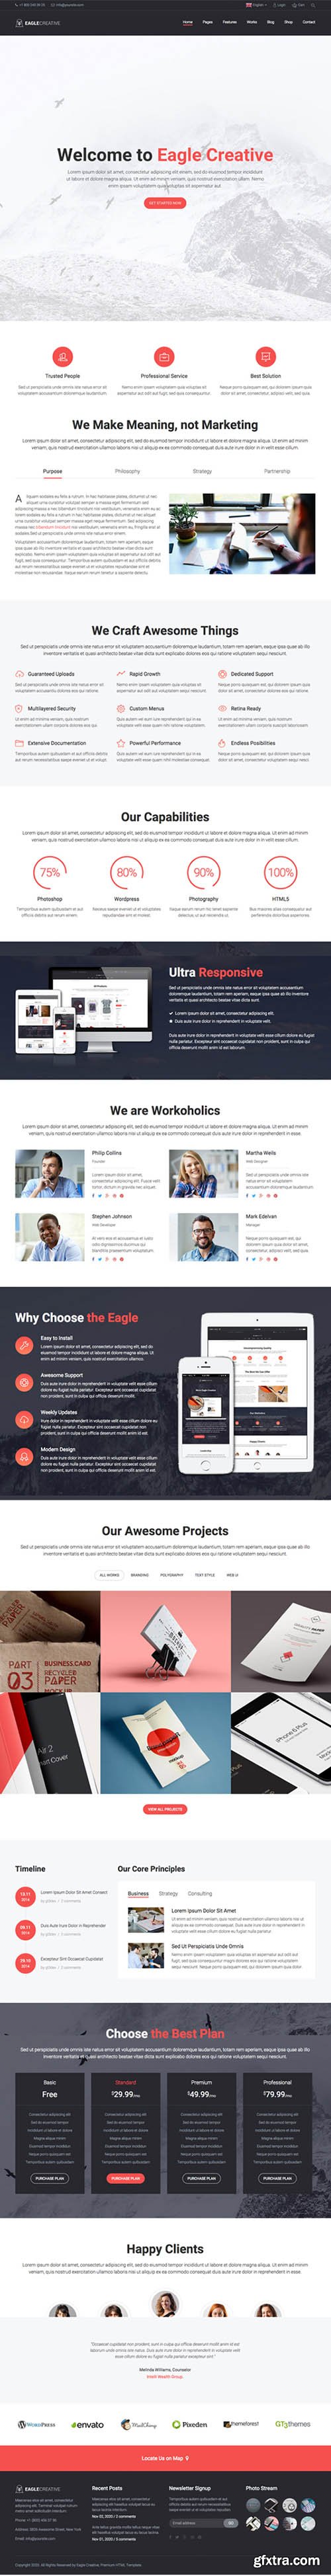 GT3Themes - Eagle Creative Business Website Template